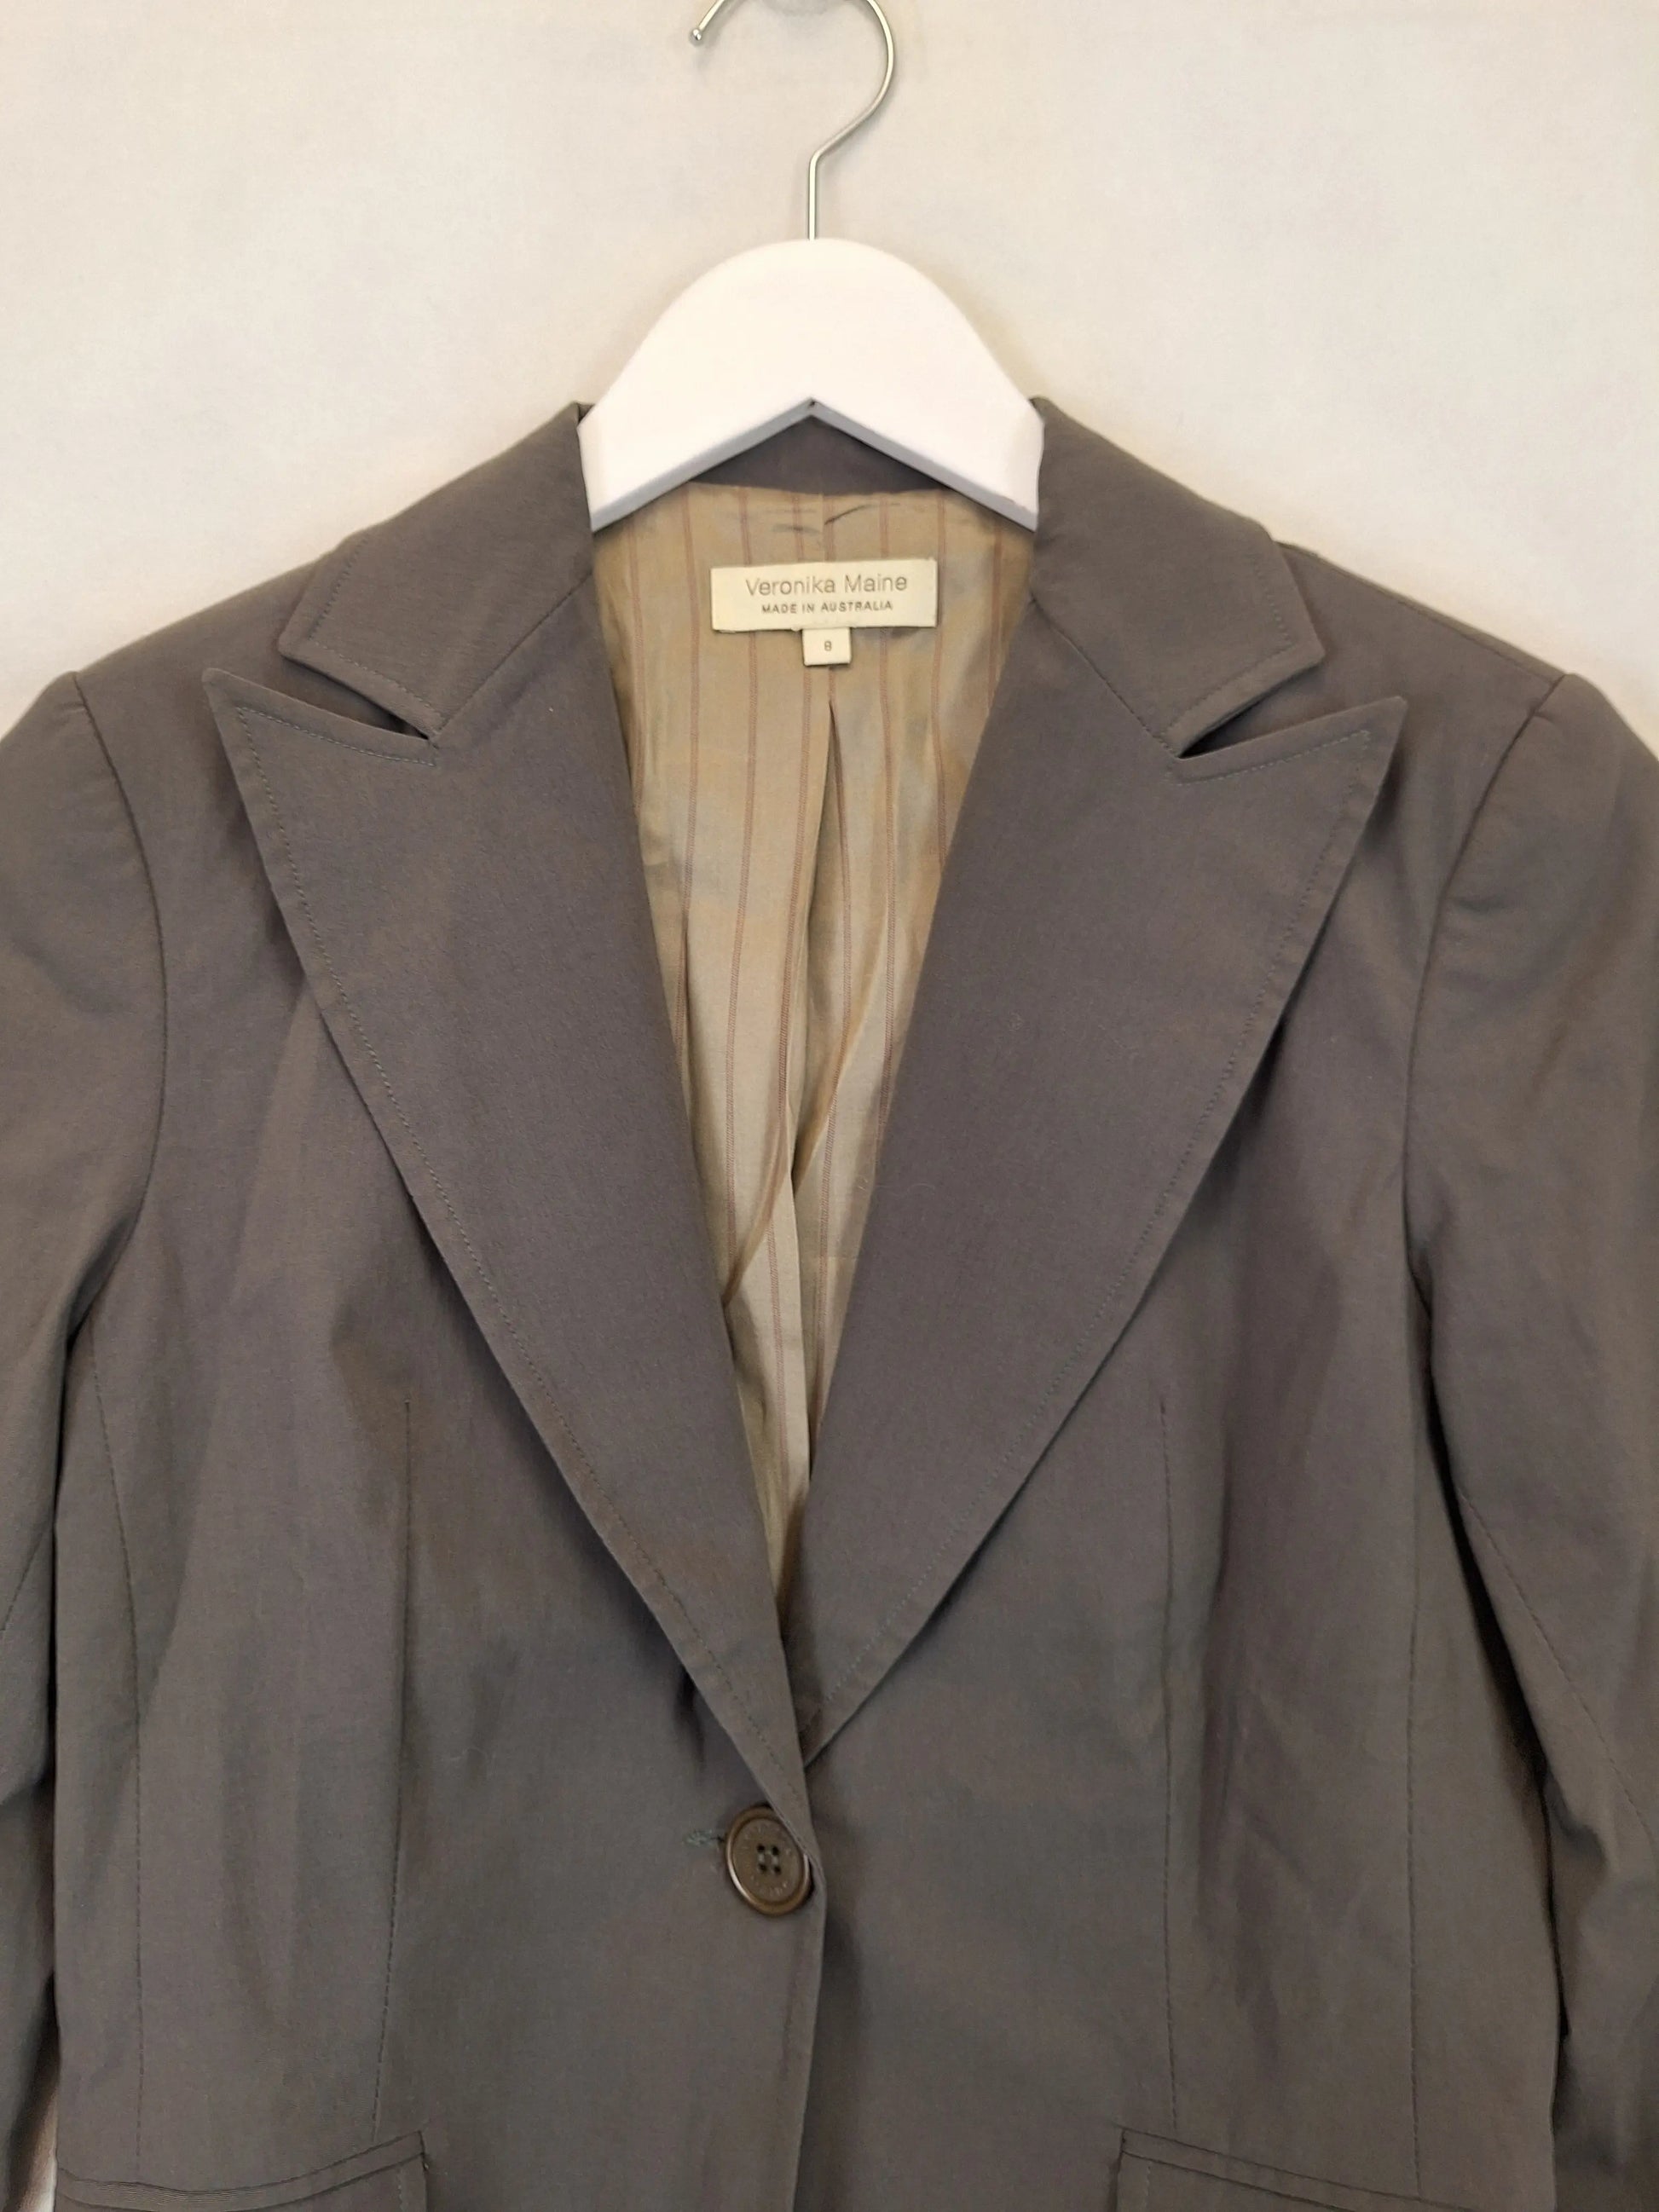 Veronika Maine Taupe Single Breasted Office Blazer Size 8 by SwapUp-Online Second Hand Store-Online Thrift Store